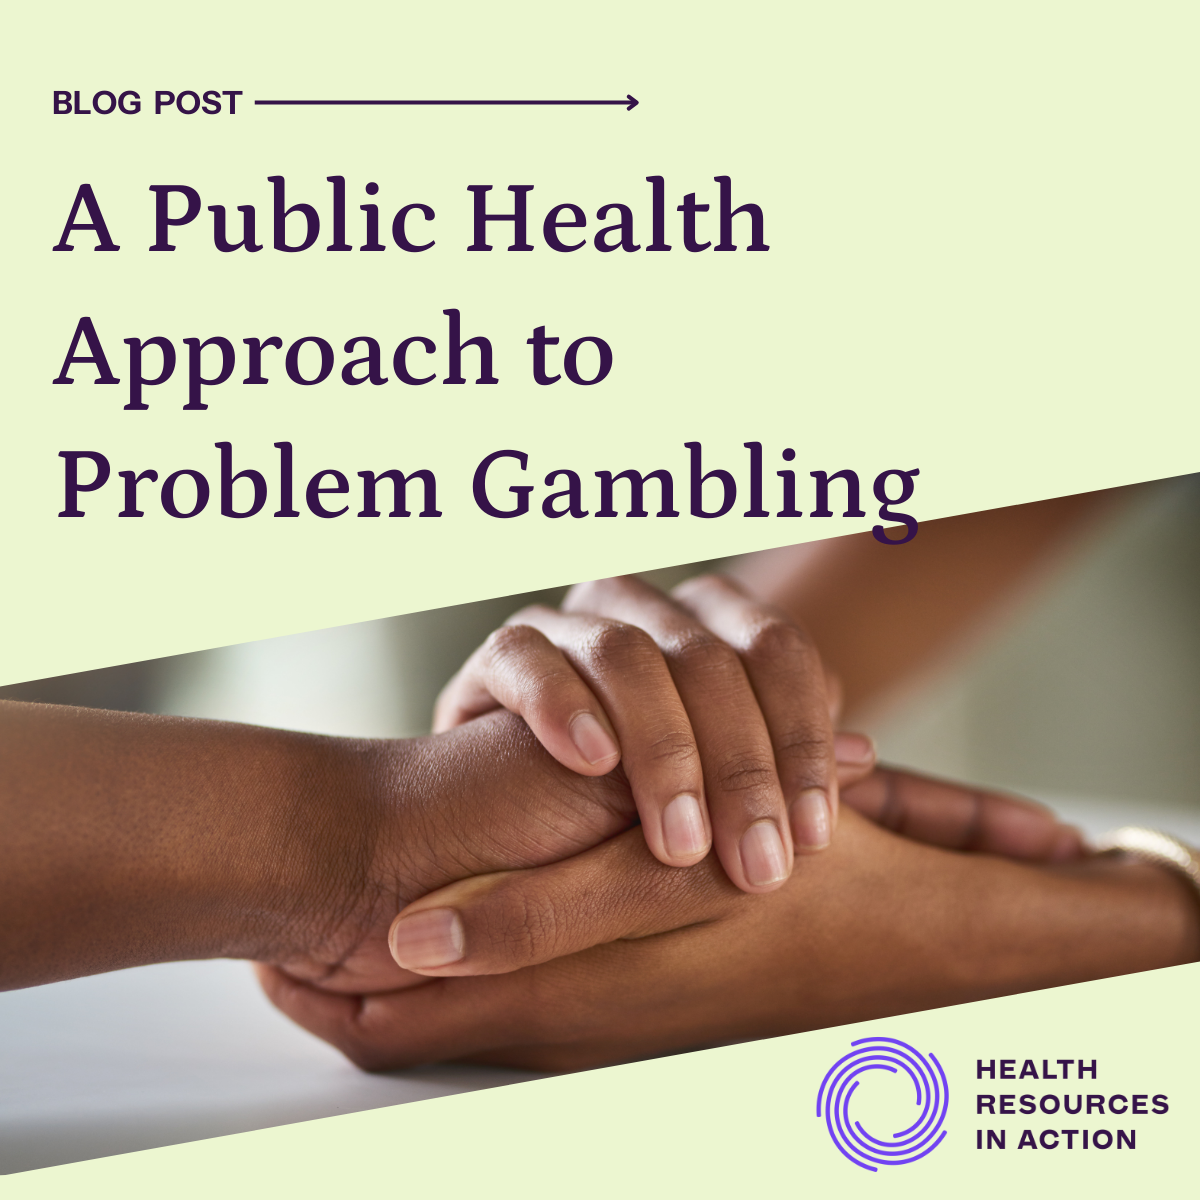 Blog post: A public health approach to problem gambling